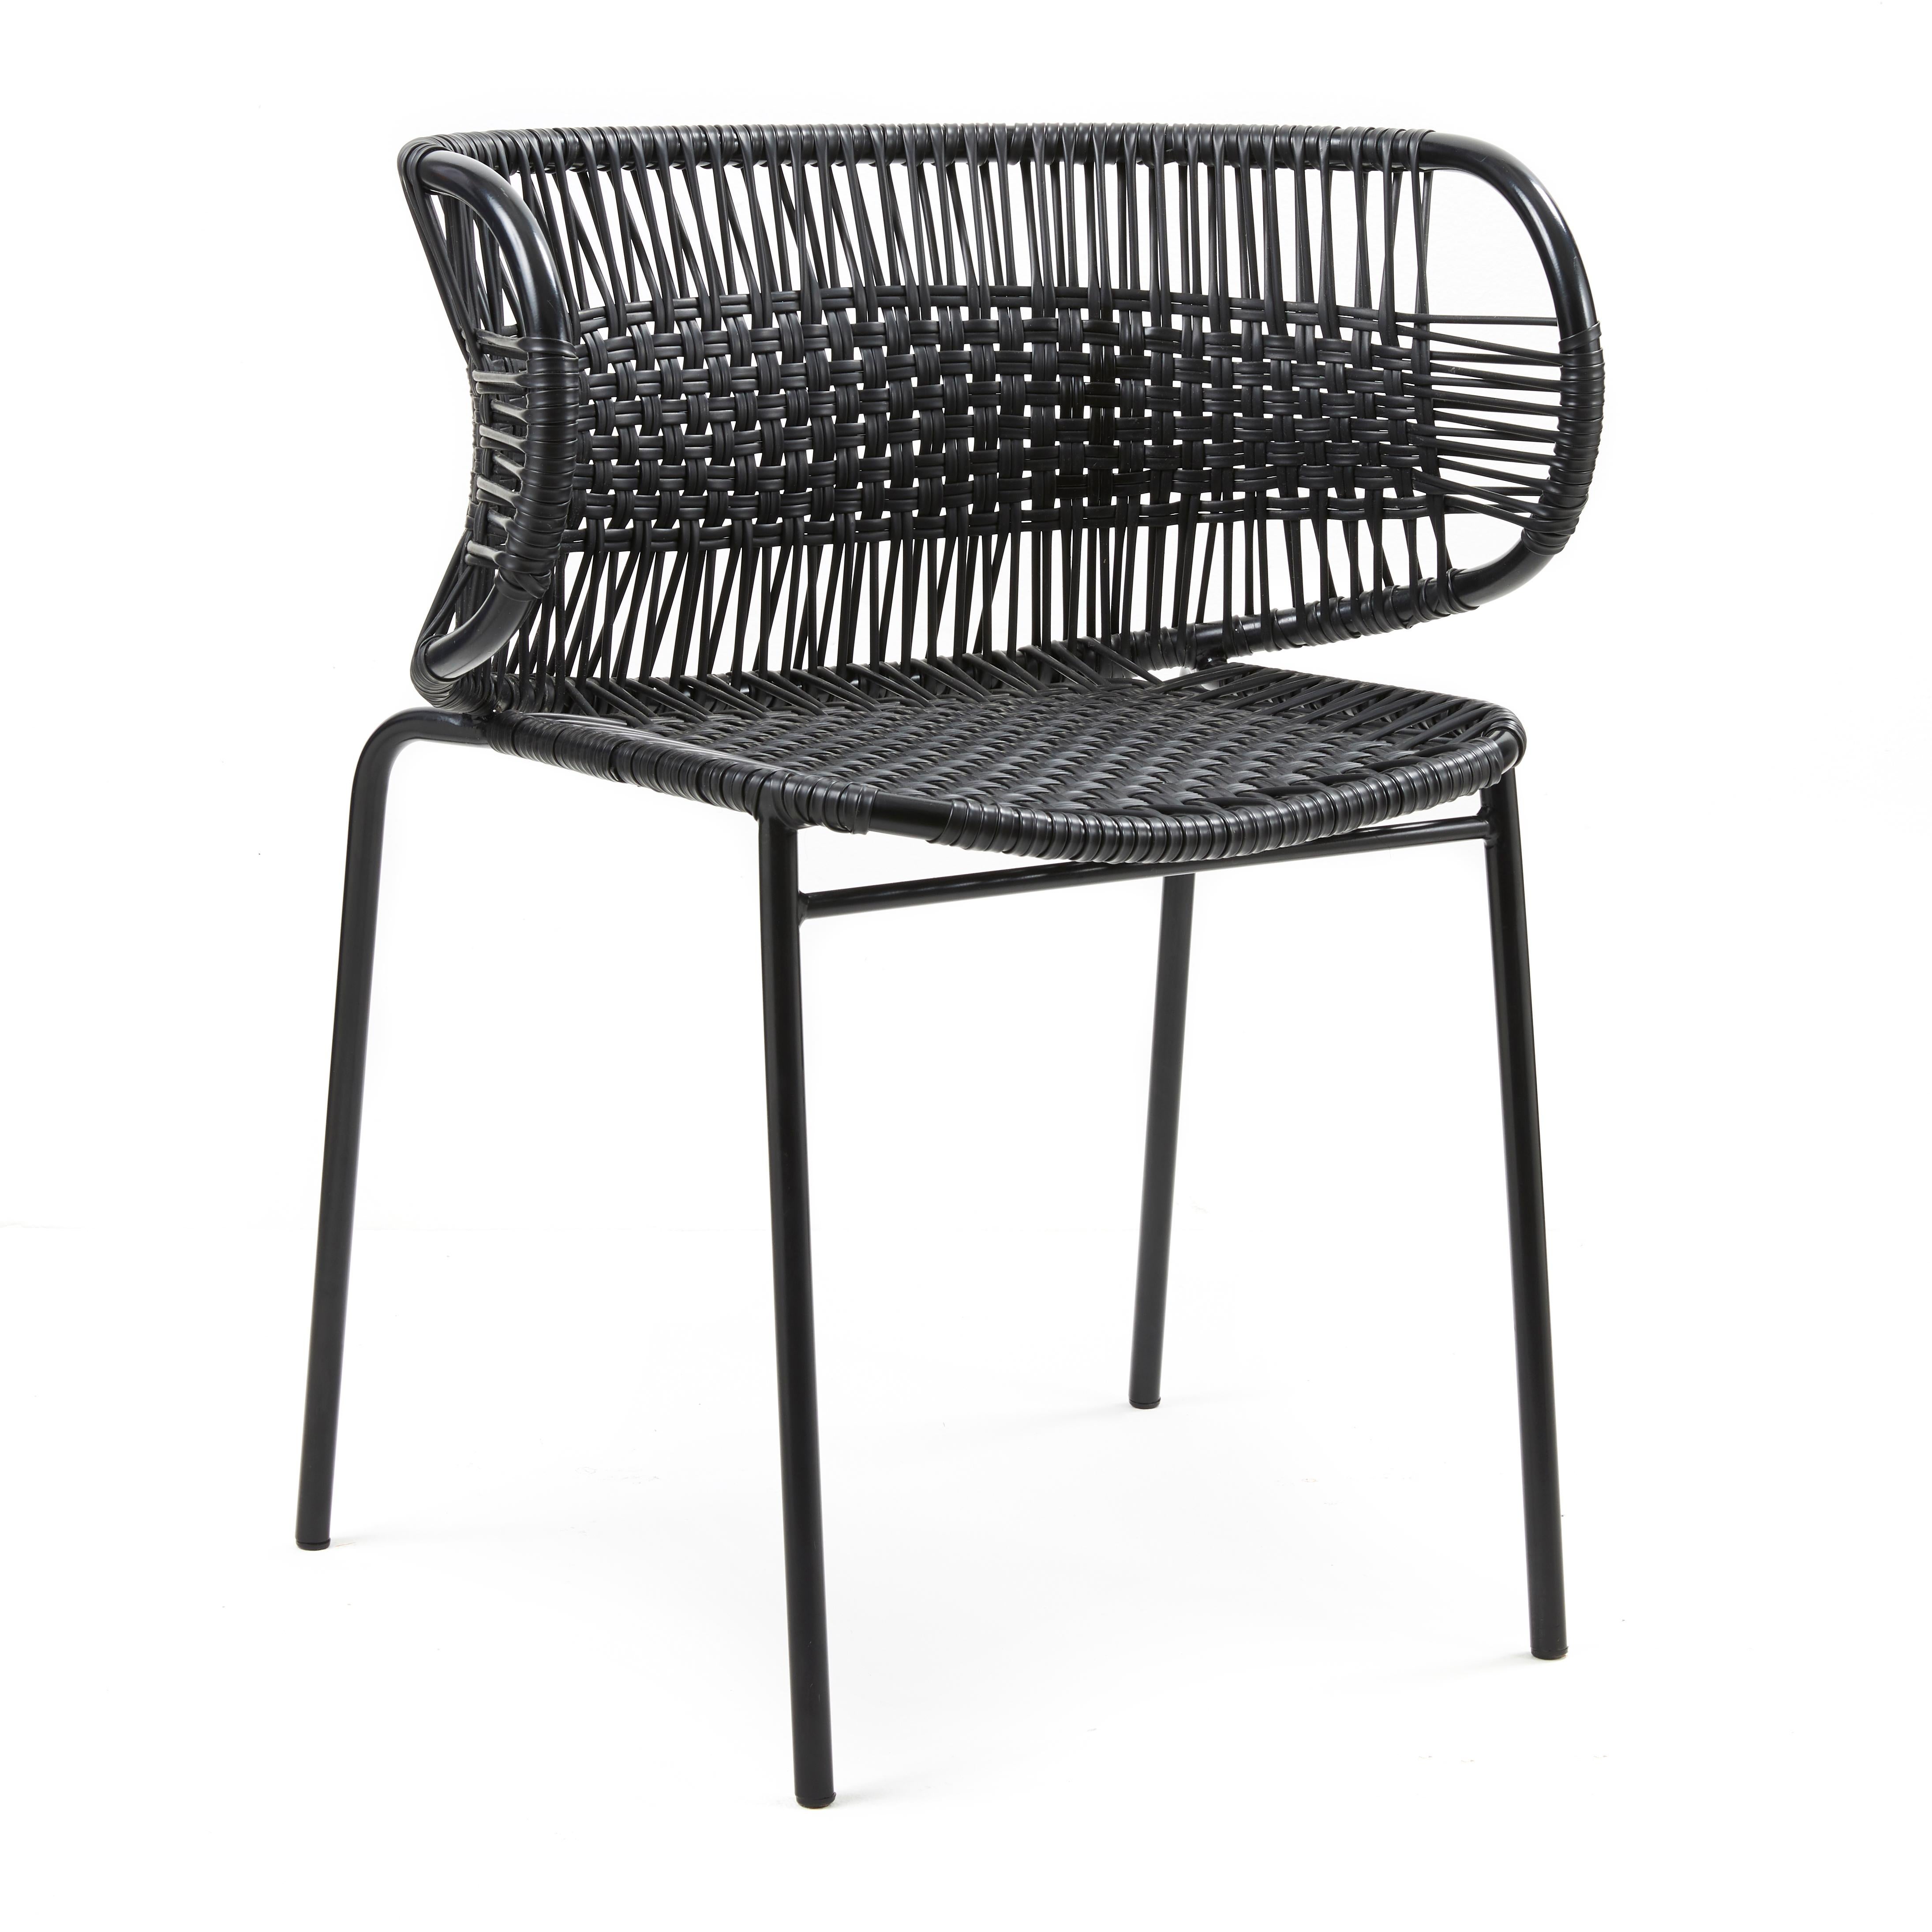 Set of 2 black Cielo stacking chair with armrest by Sebastian Herkner.
Materials: galvanized and powder-coated tubular steel. PVC strings are made from recycled plastic.
Technique: made from recycled plastic and weaved by local craftspeople in